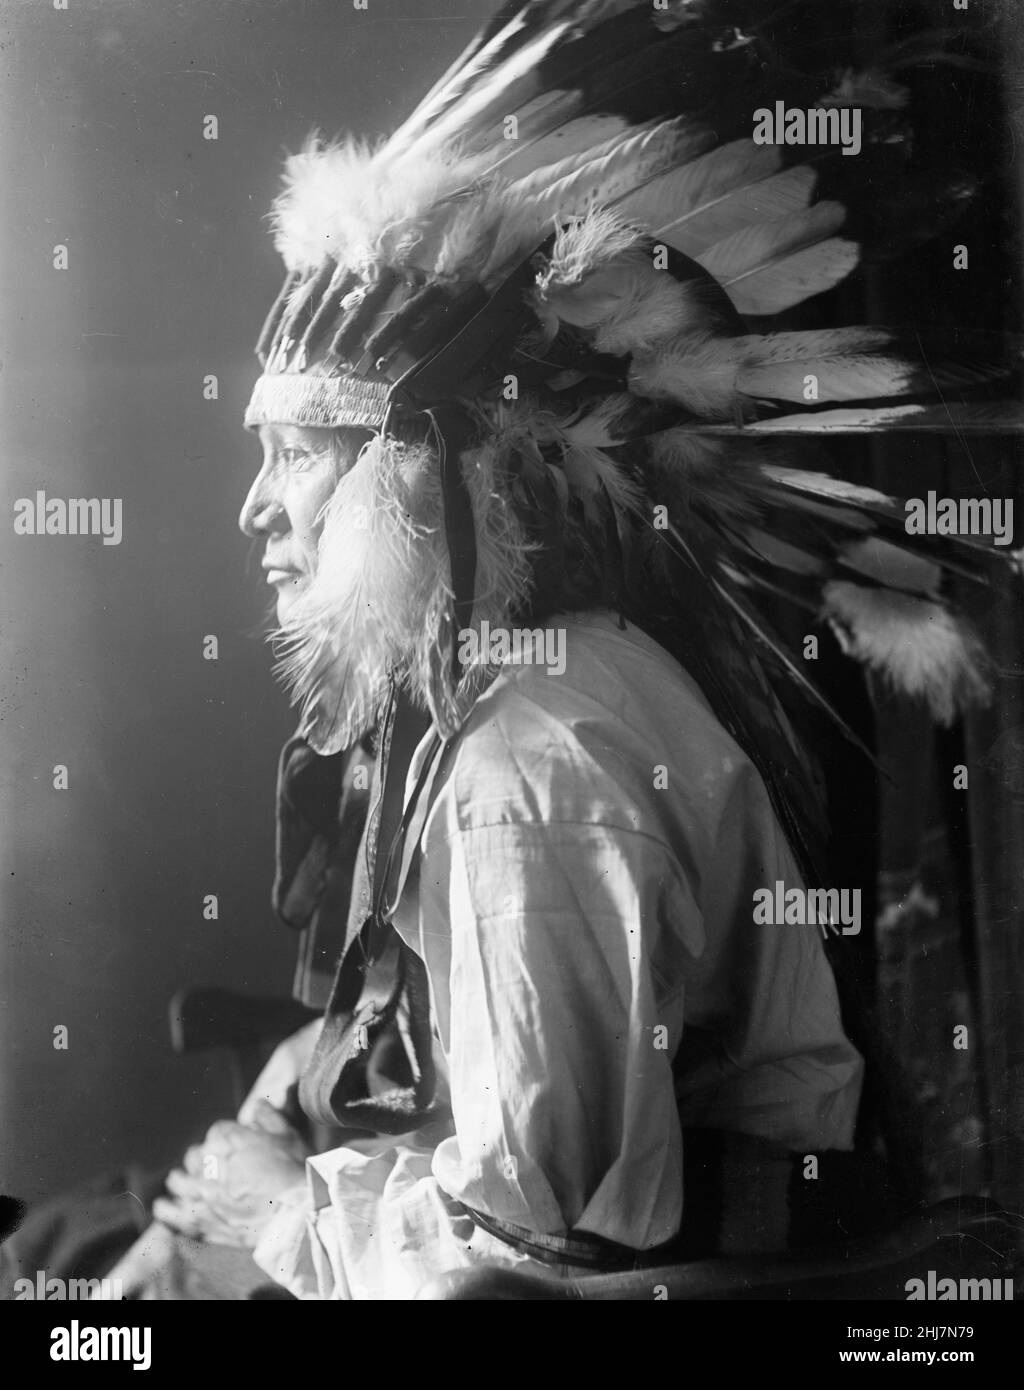 Whirlwind Horse - Antique and vintage photo - Native american / Indian / American Indian, Käsebier, Gertrude, 1852-1934, photographer. 1900. Stock Photo